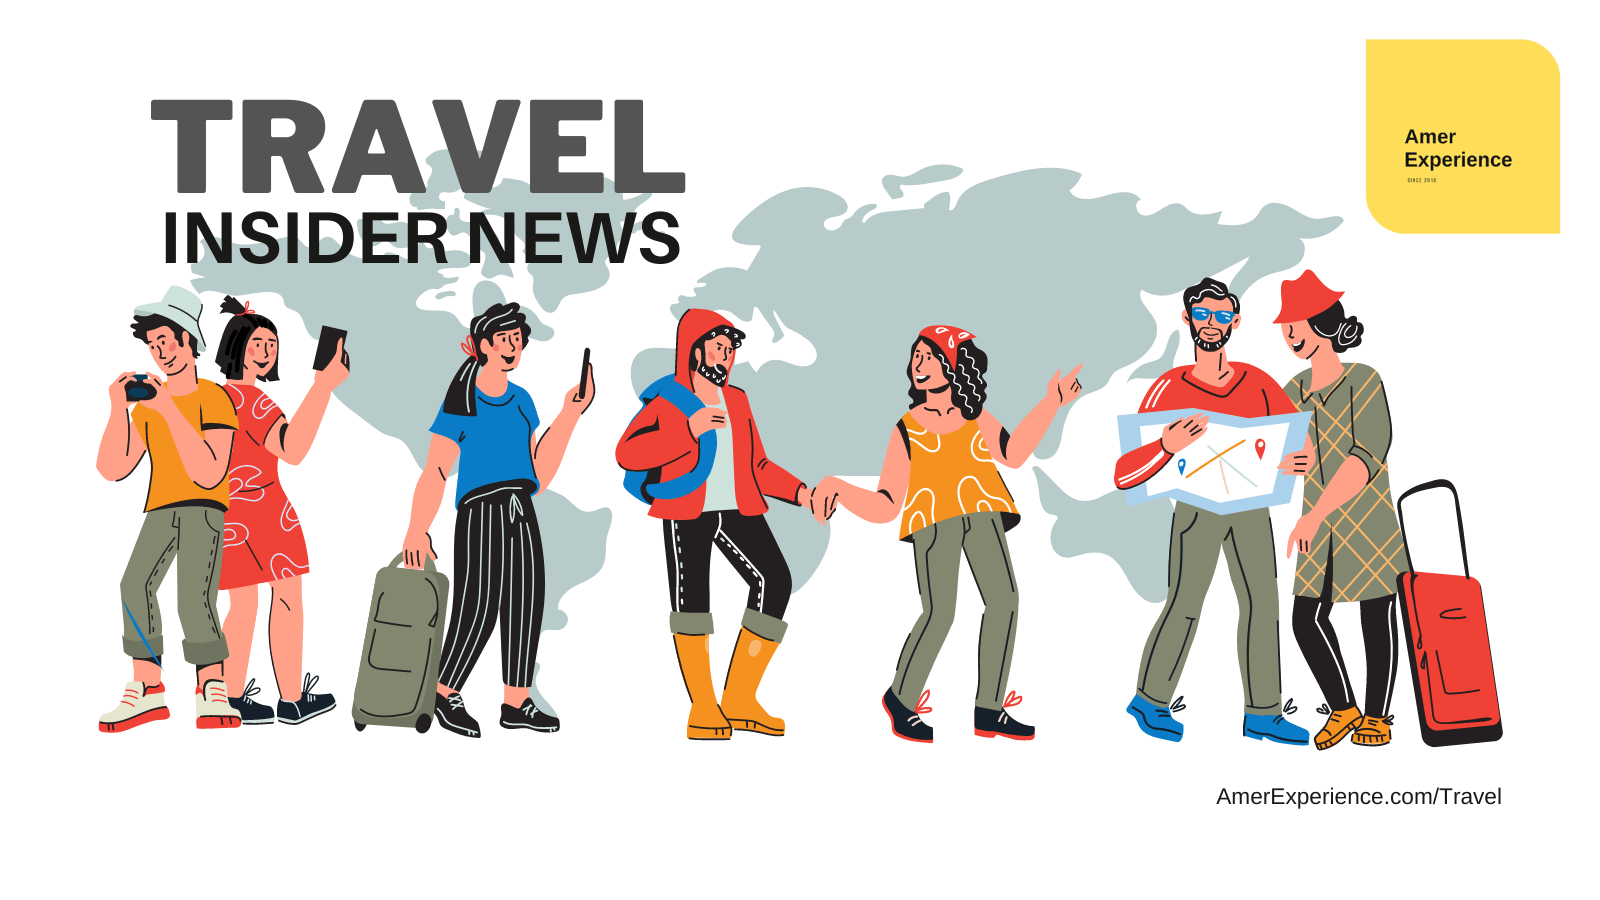 travel insider news hot from the press - Travel and Golf Influencer - AmerExperience Content Curator